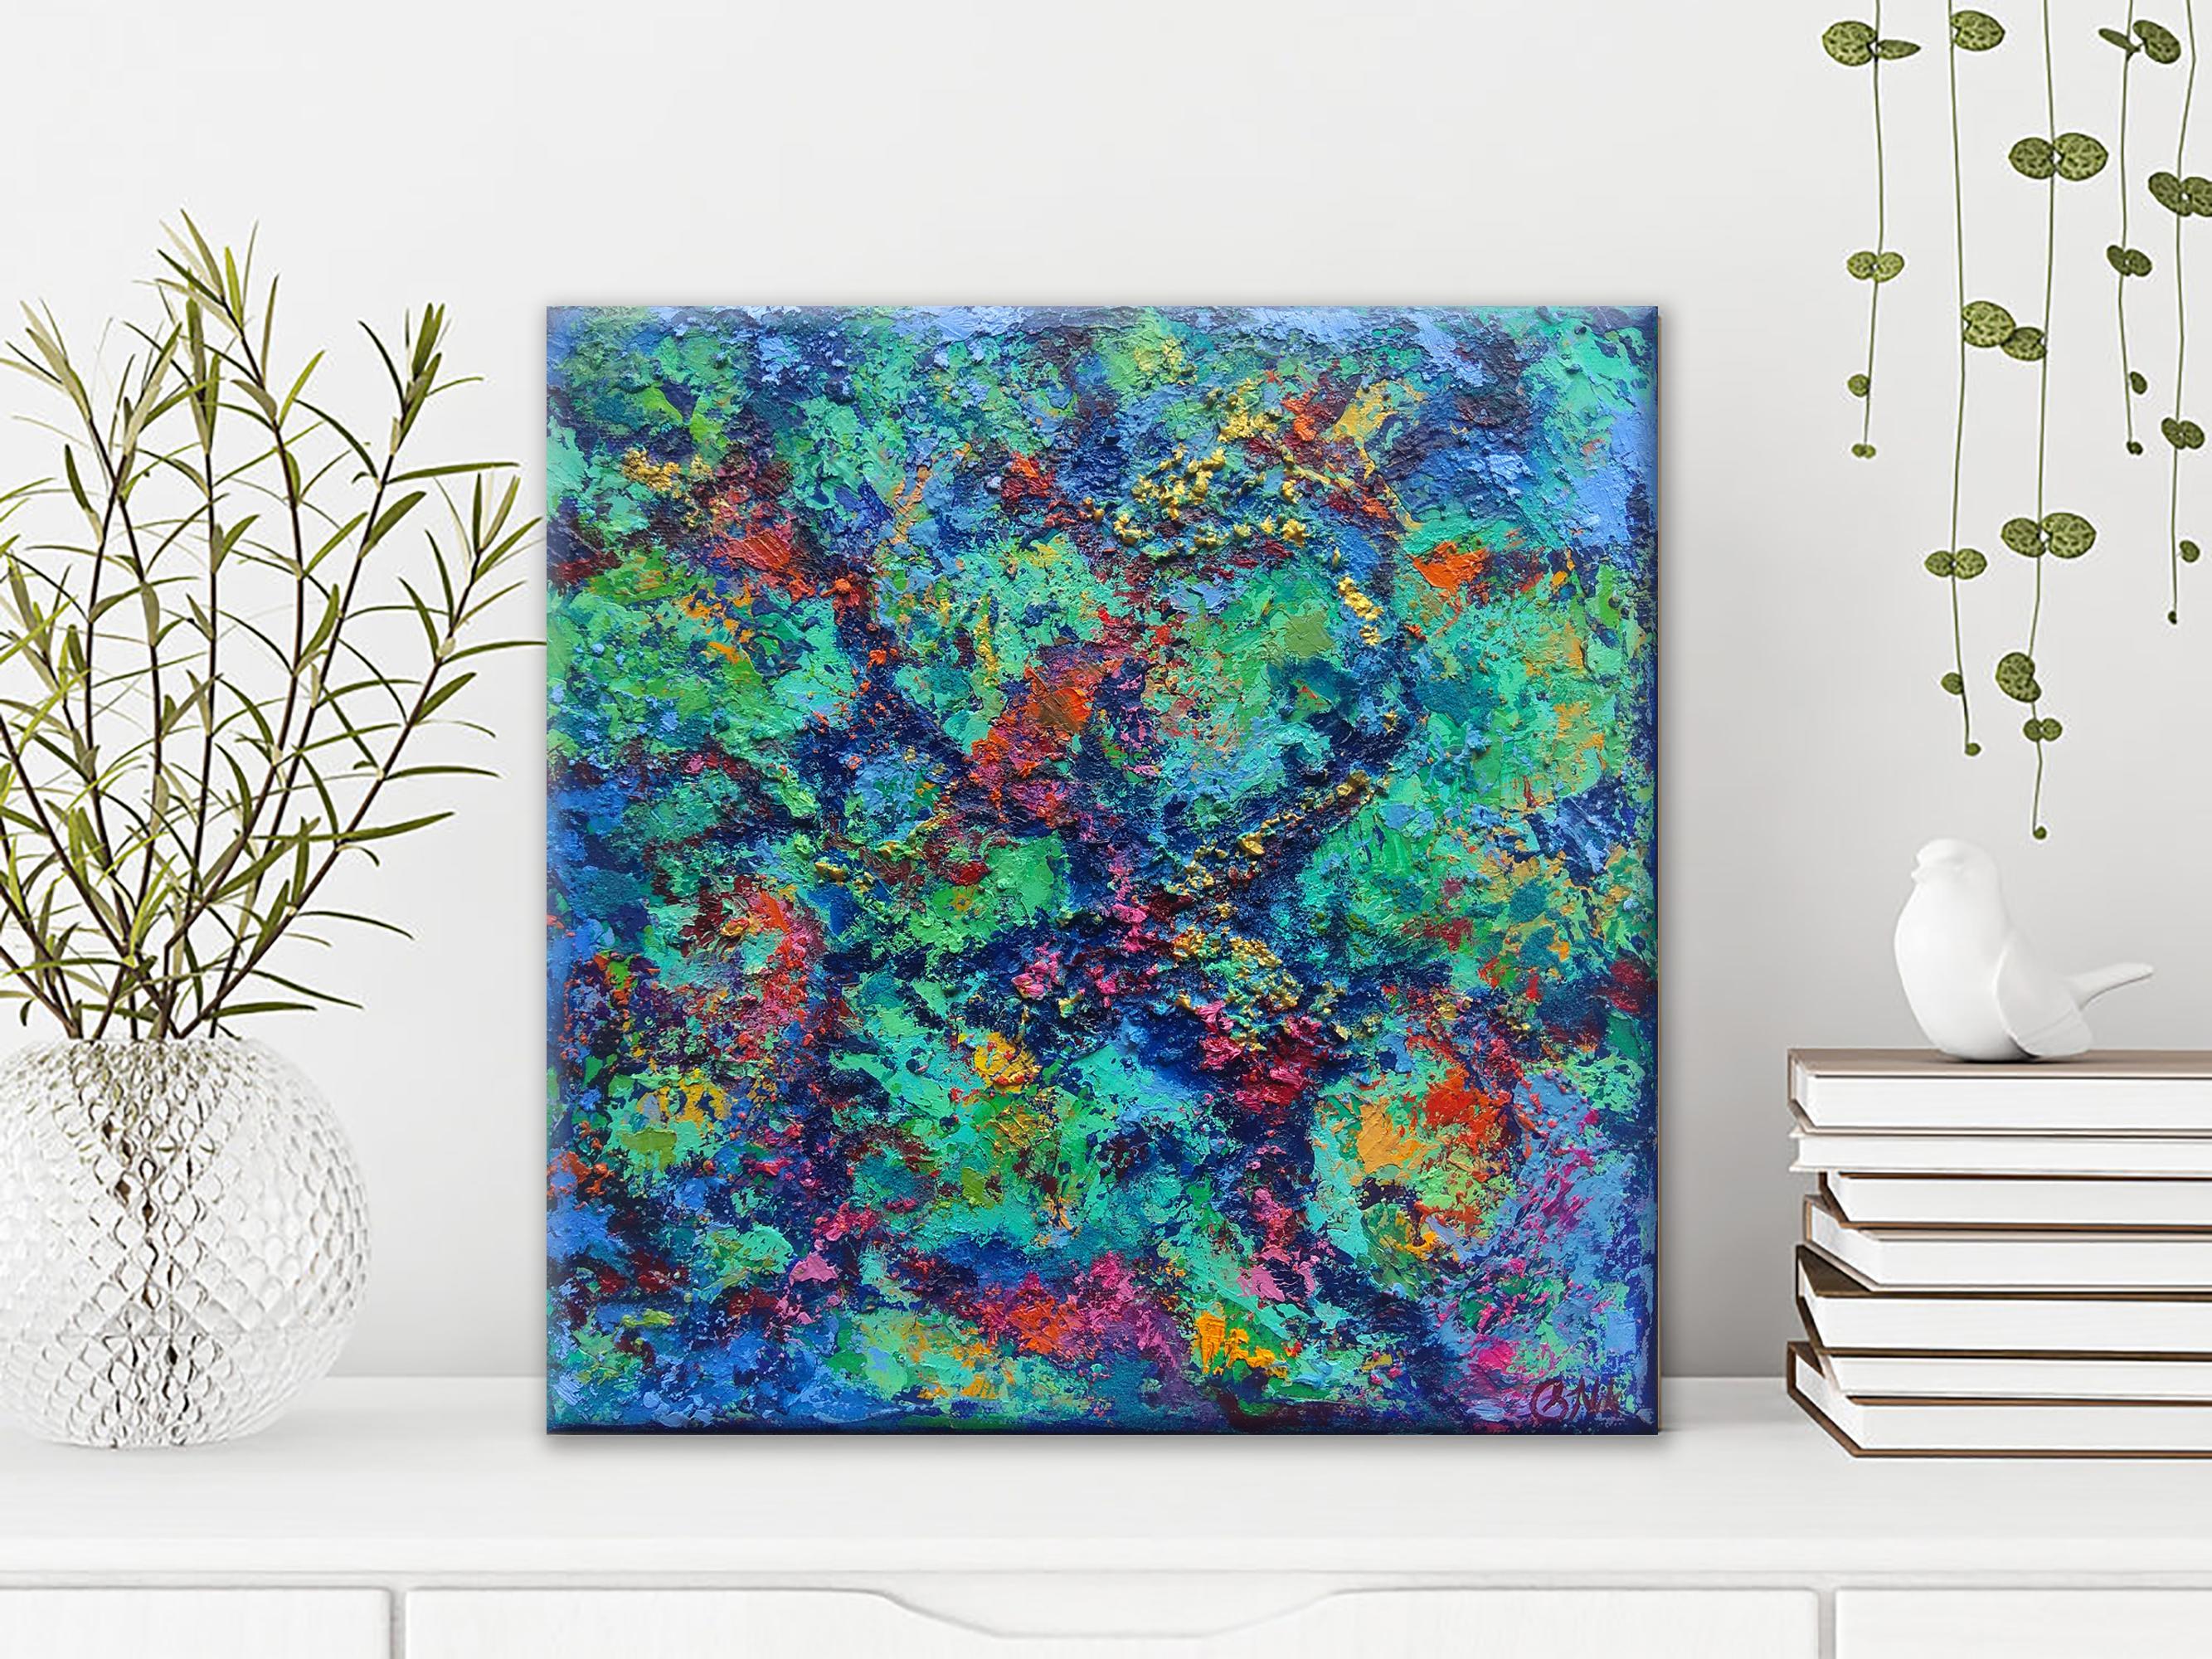 Textured Oil Painting - Abstract Coral Reef

Description: Immerse yourself in the mesmerizing beauty of an underwater world with this stunning textured oil painting by artist Olga Nikitina. Created using sand to add texture, this artwork depicts a